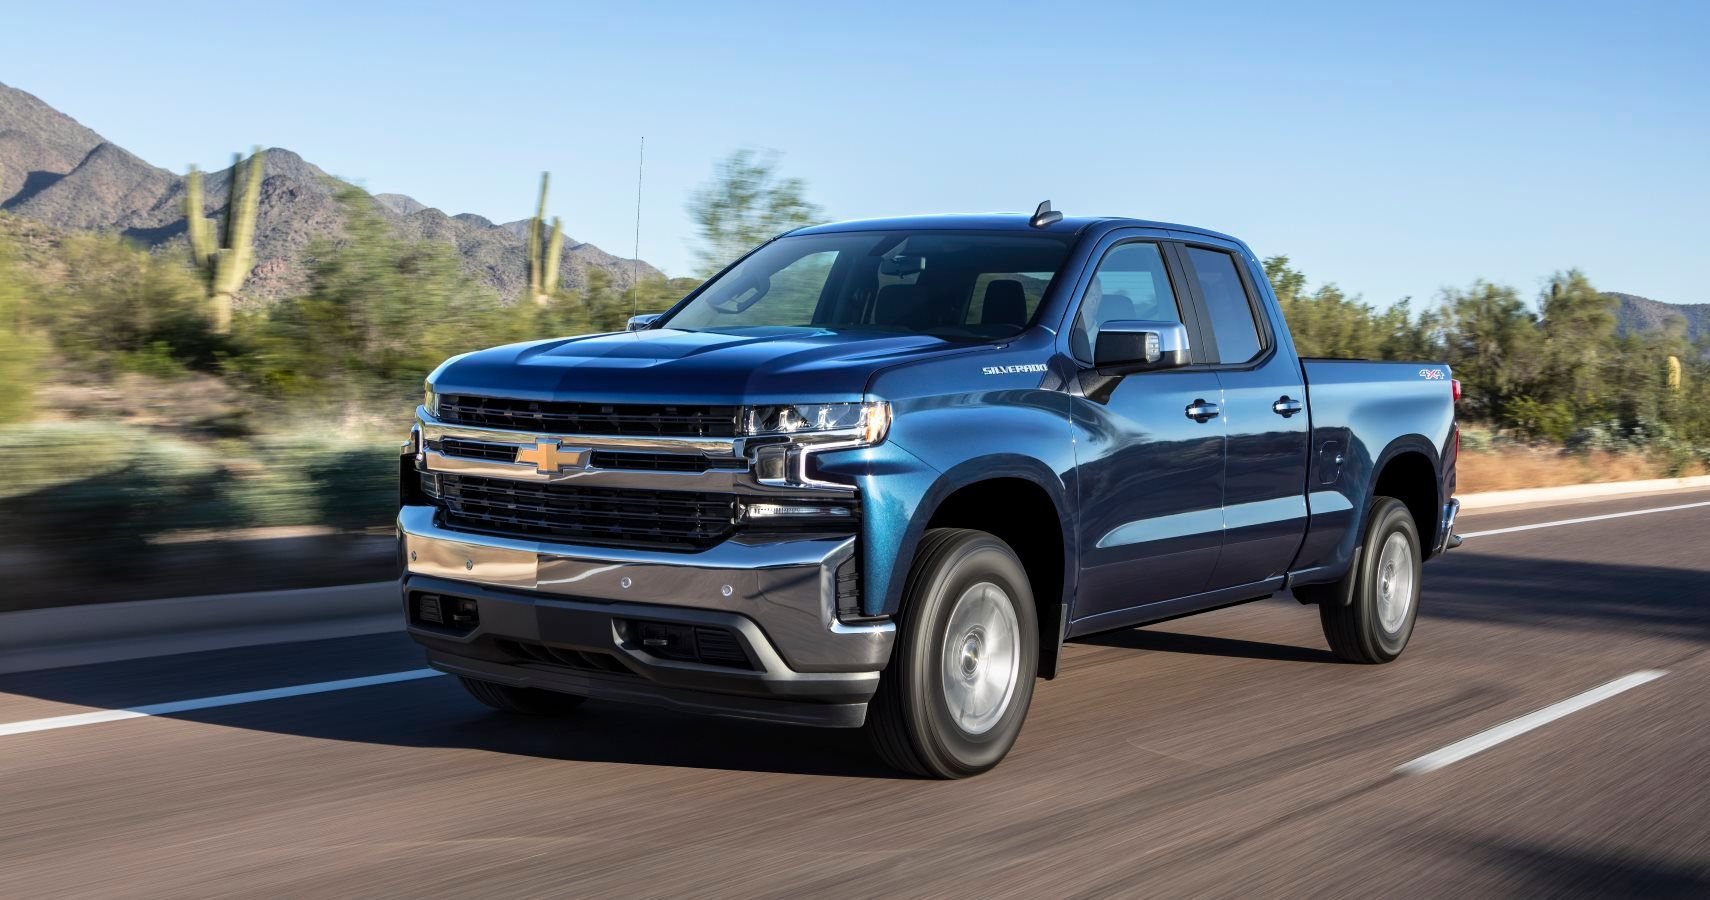 Pickup Trucks Cost Too Much For What You Get, According To New Survey